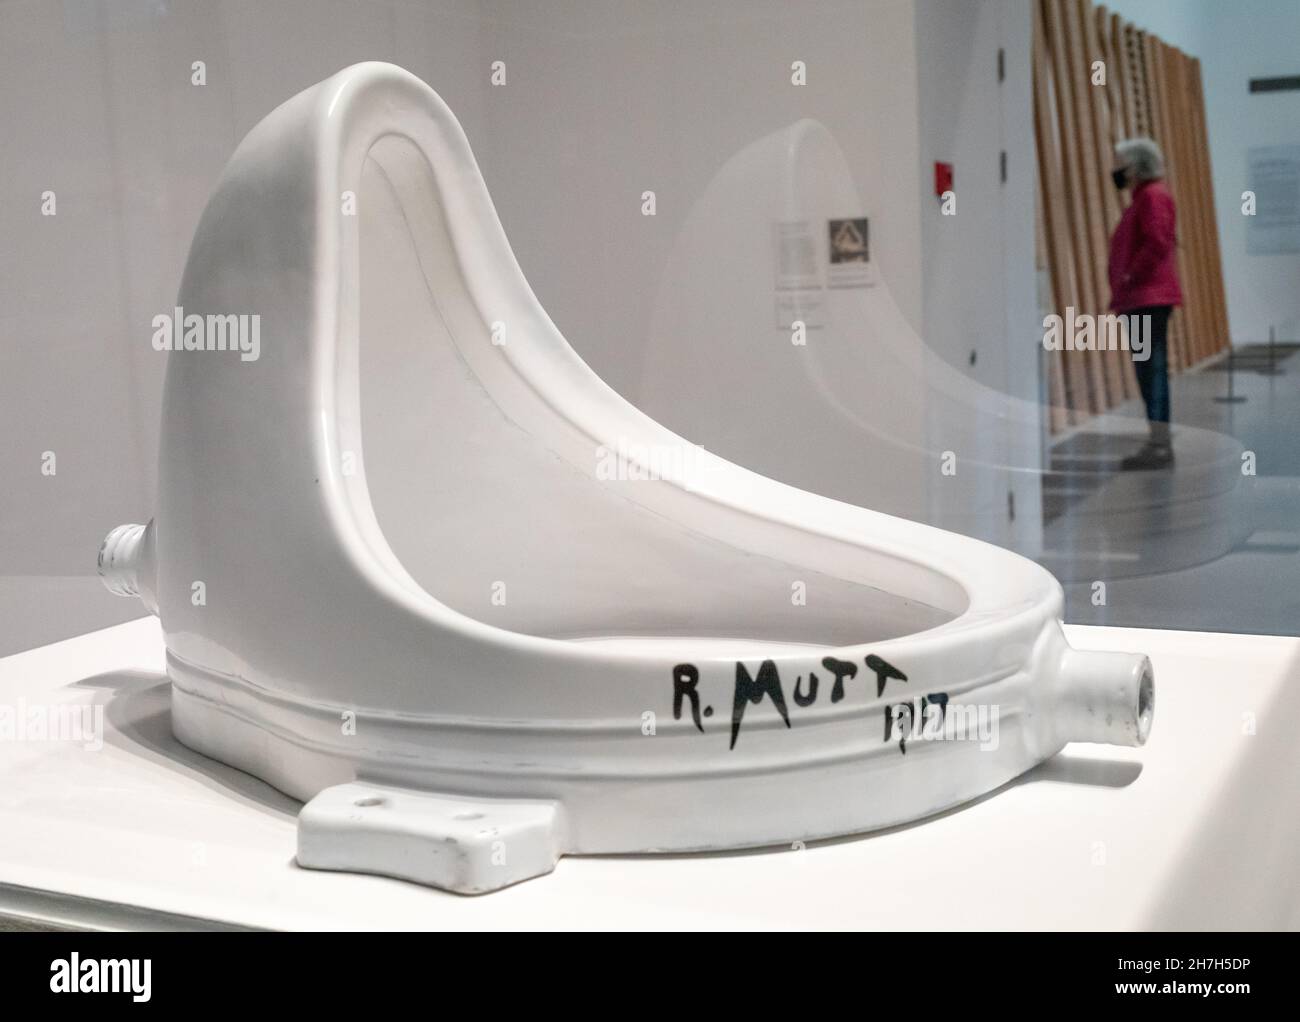 Fountain by Marcel Duchamp at Tate Modern, London, UK. The original, made in 1917, is lost and this is an officially sanctioned replica. Stock Photo